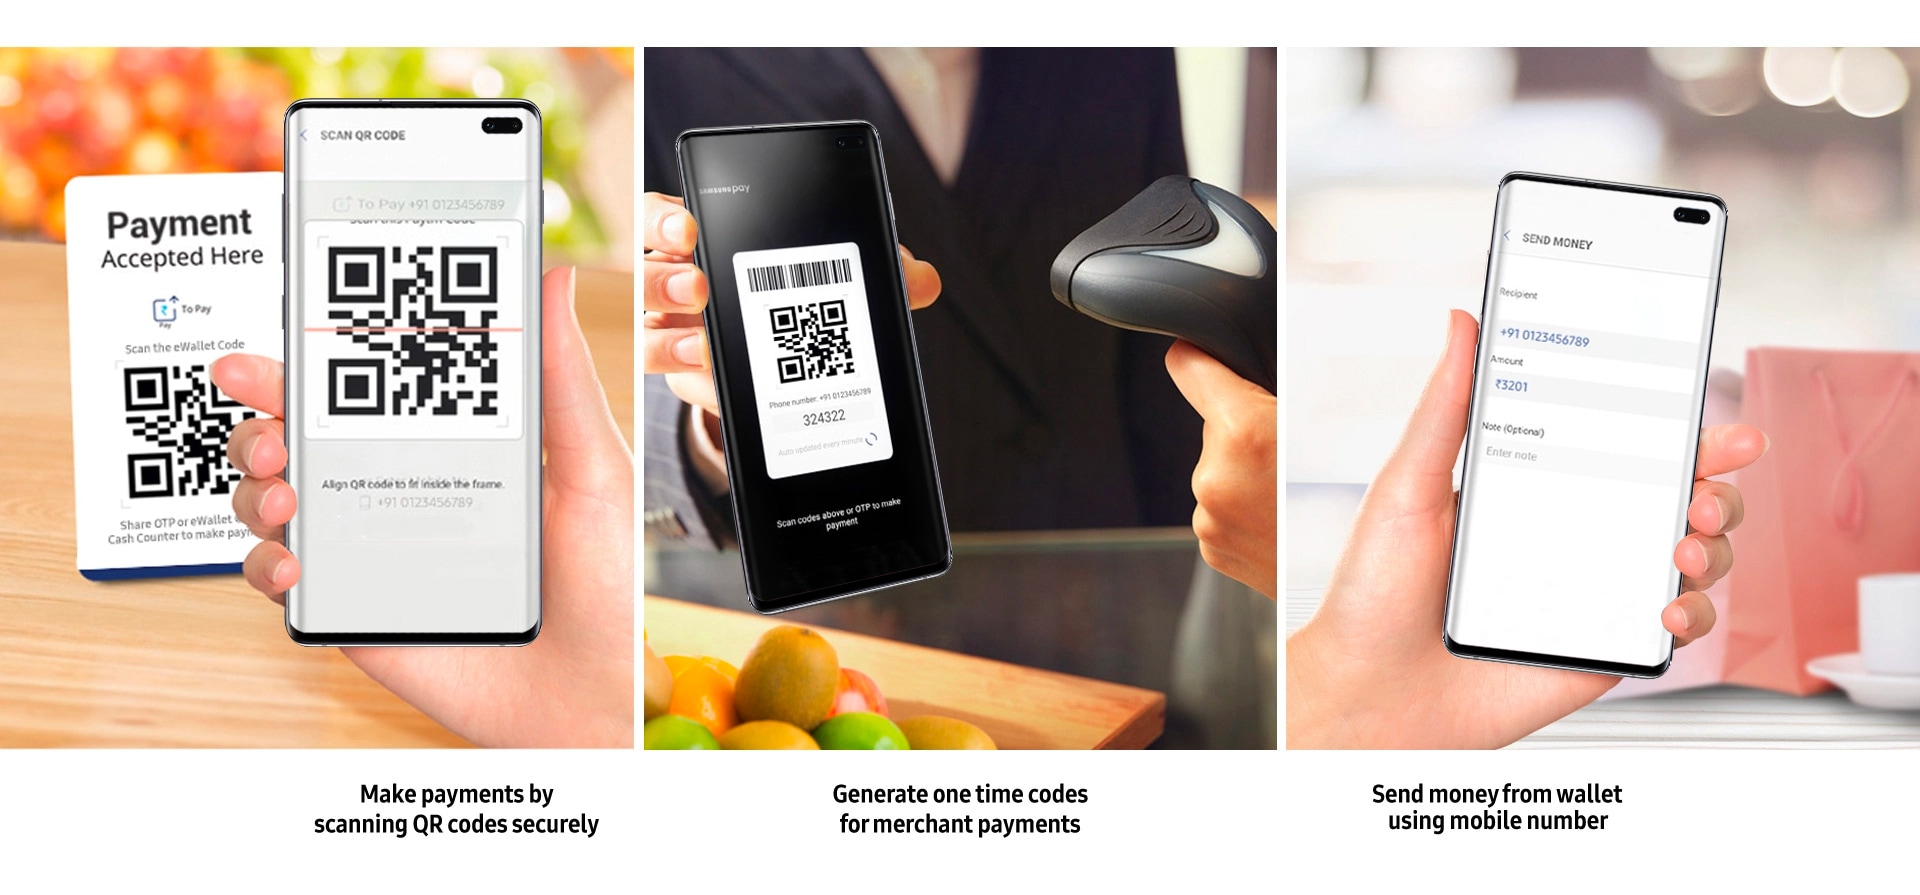 Mobile Wallet Payment with Samsung Pay